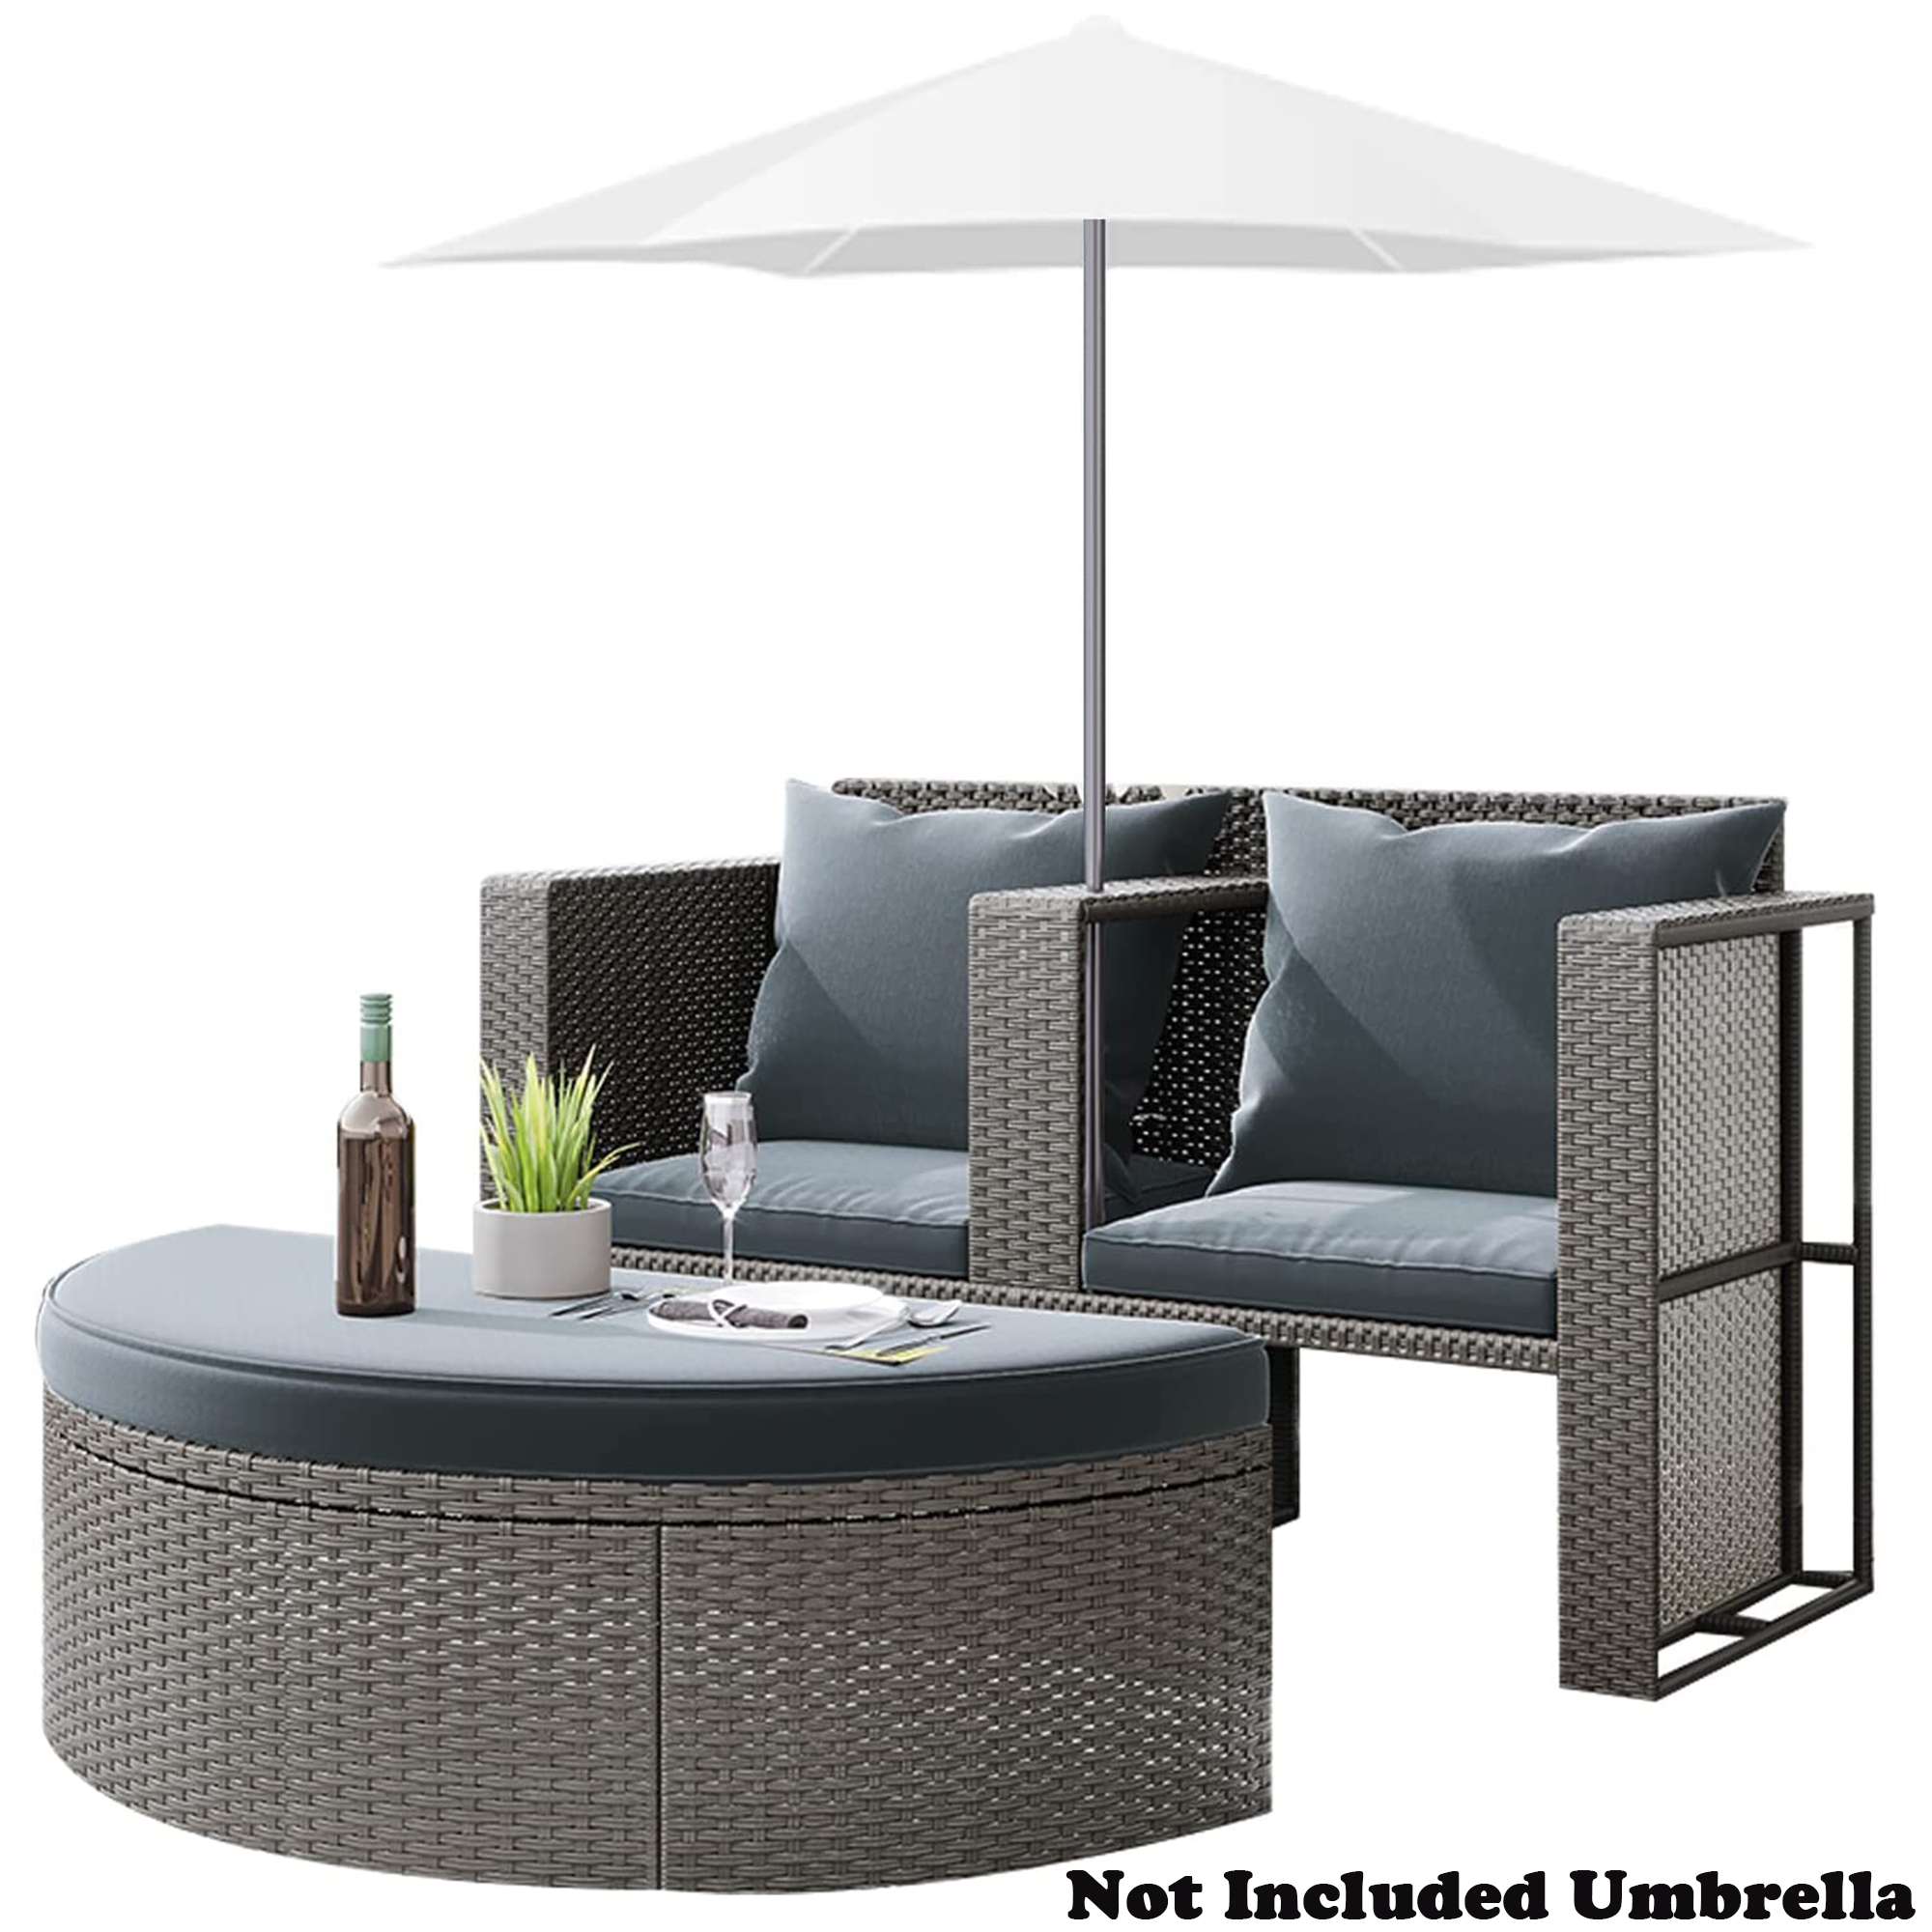 Outdoor Garden Patio Sofa Sets with Side Table for Umbrella, SEGMART Newest 2 Pieces Wicker Patio Furniture Set with Removable Seat Cushions & Half-Moon Sofa for Porch, Backyard, 300lbs, S1542 - image 1 of 9